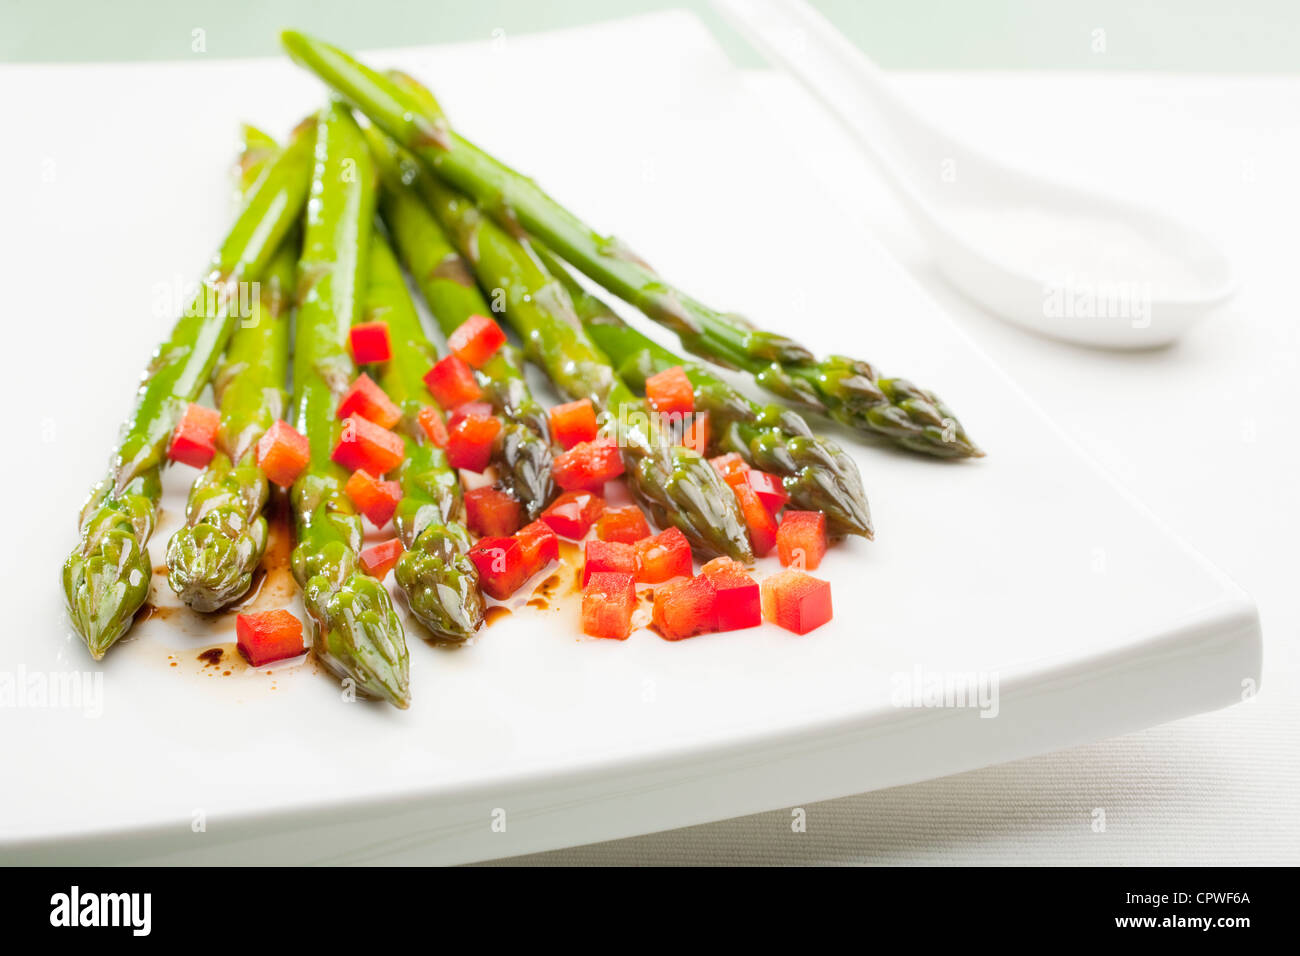 Asparagus with red capsicum amd balsamic vinaigrette. Stock Photo